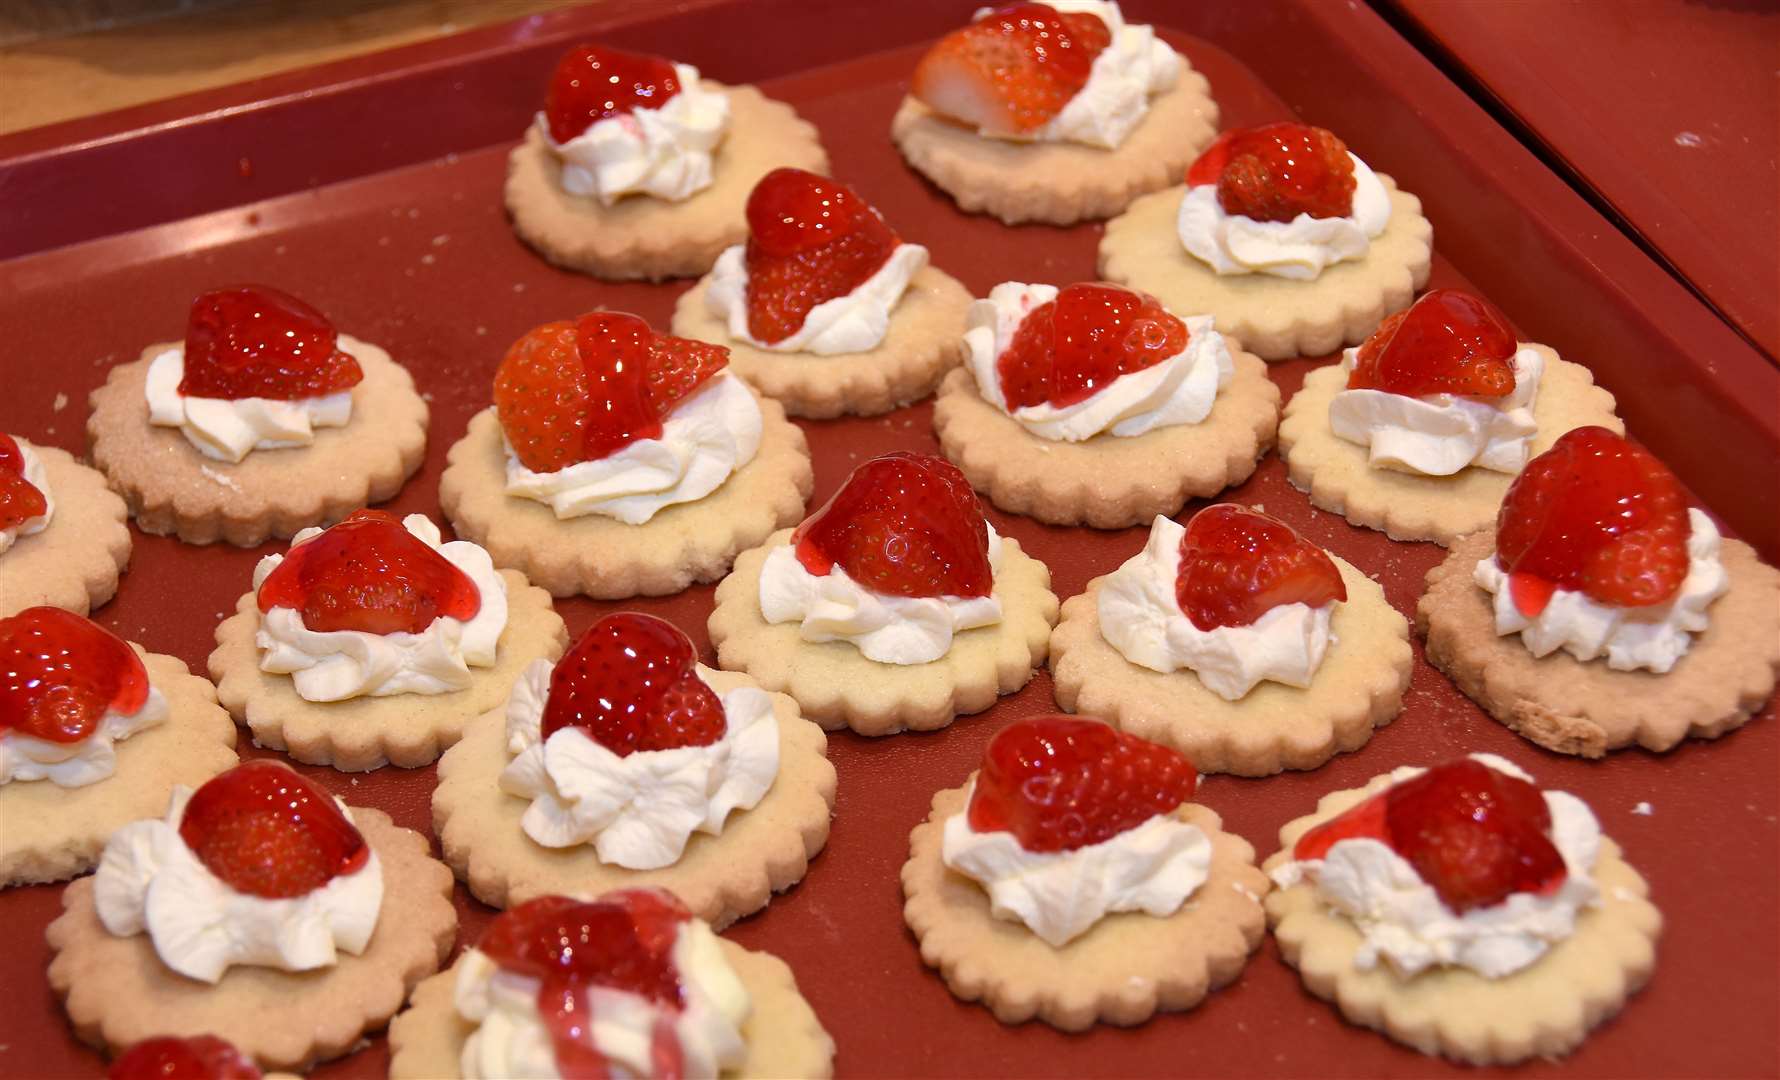 Some delicious looking strawberry tarts.